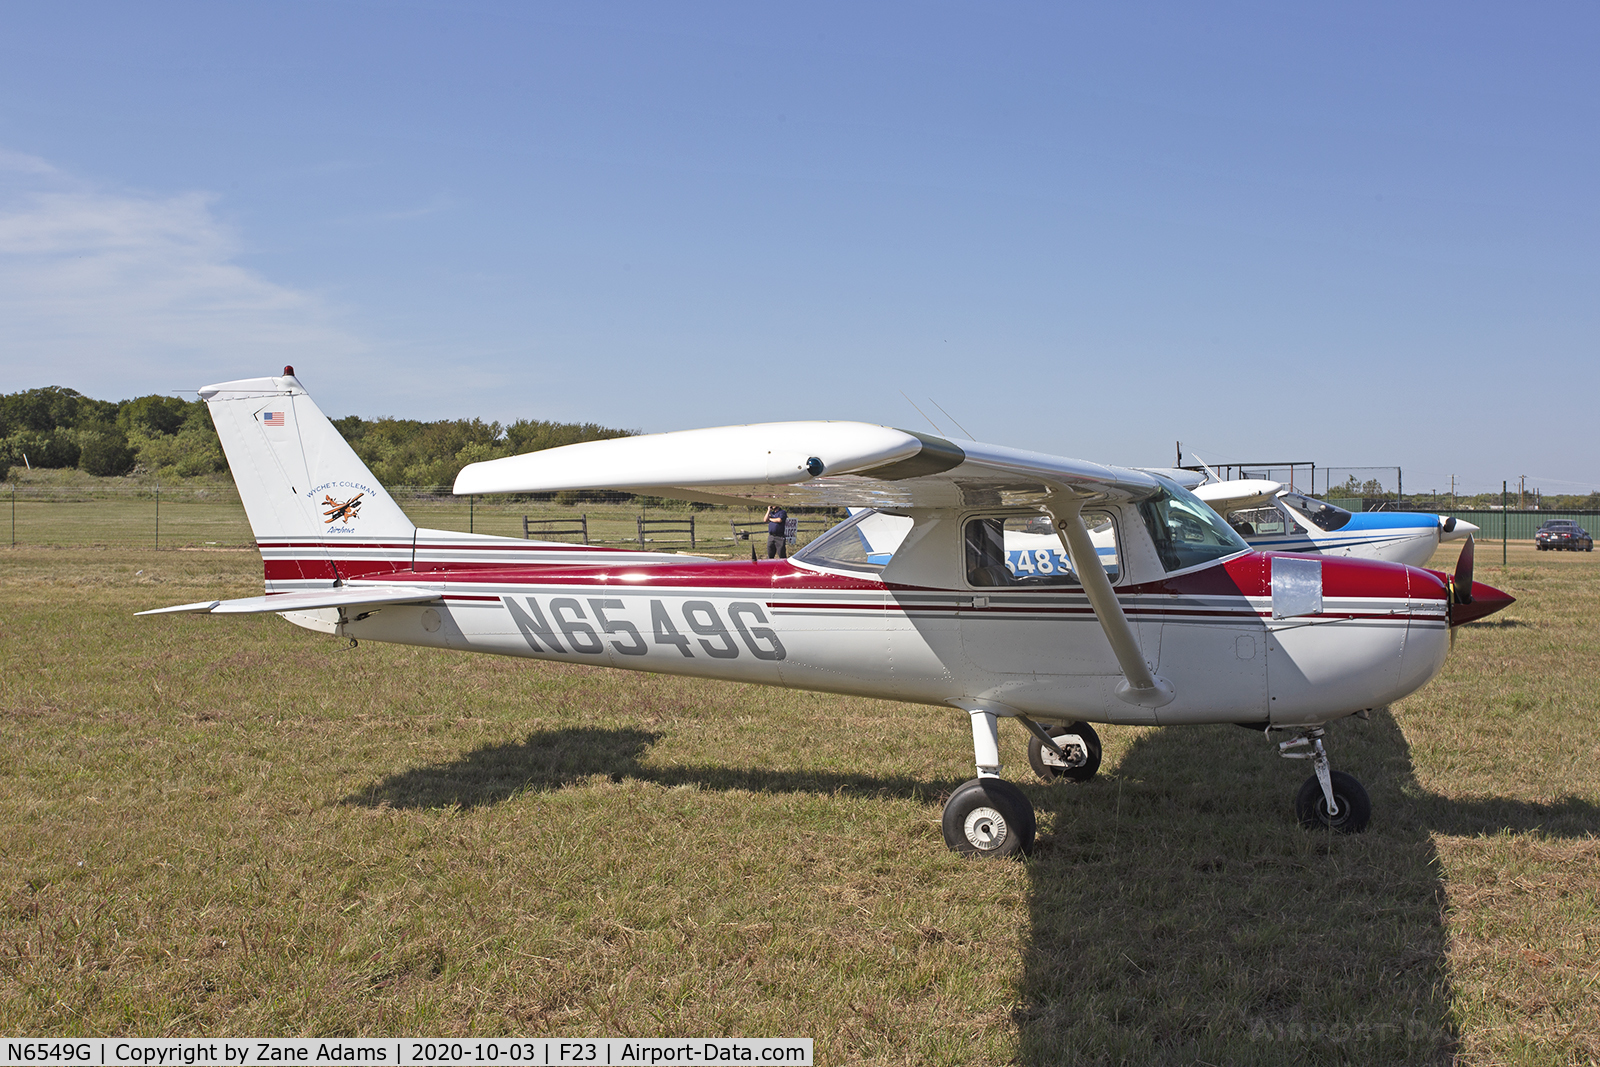 N6549G, 1970 Cessna 150L C/N 15072049, At the 2020 Ranger Tx Fly-in